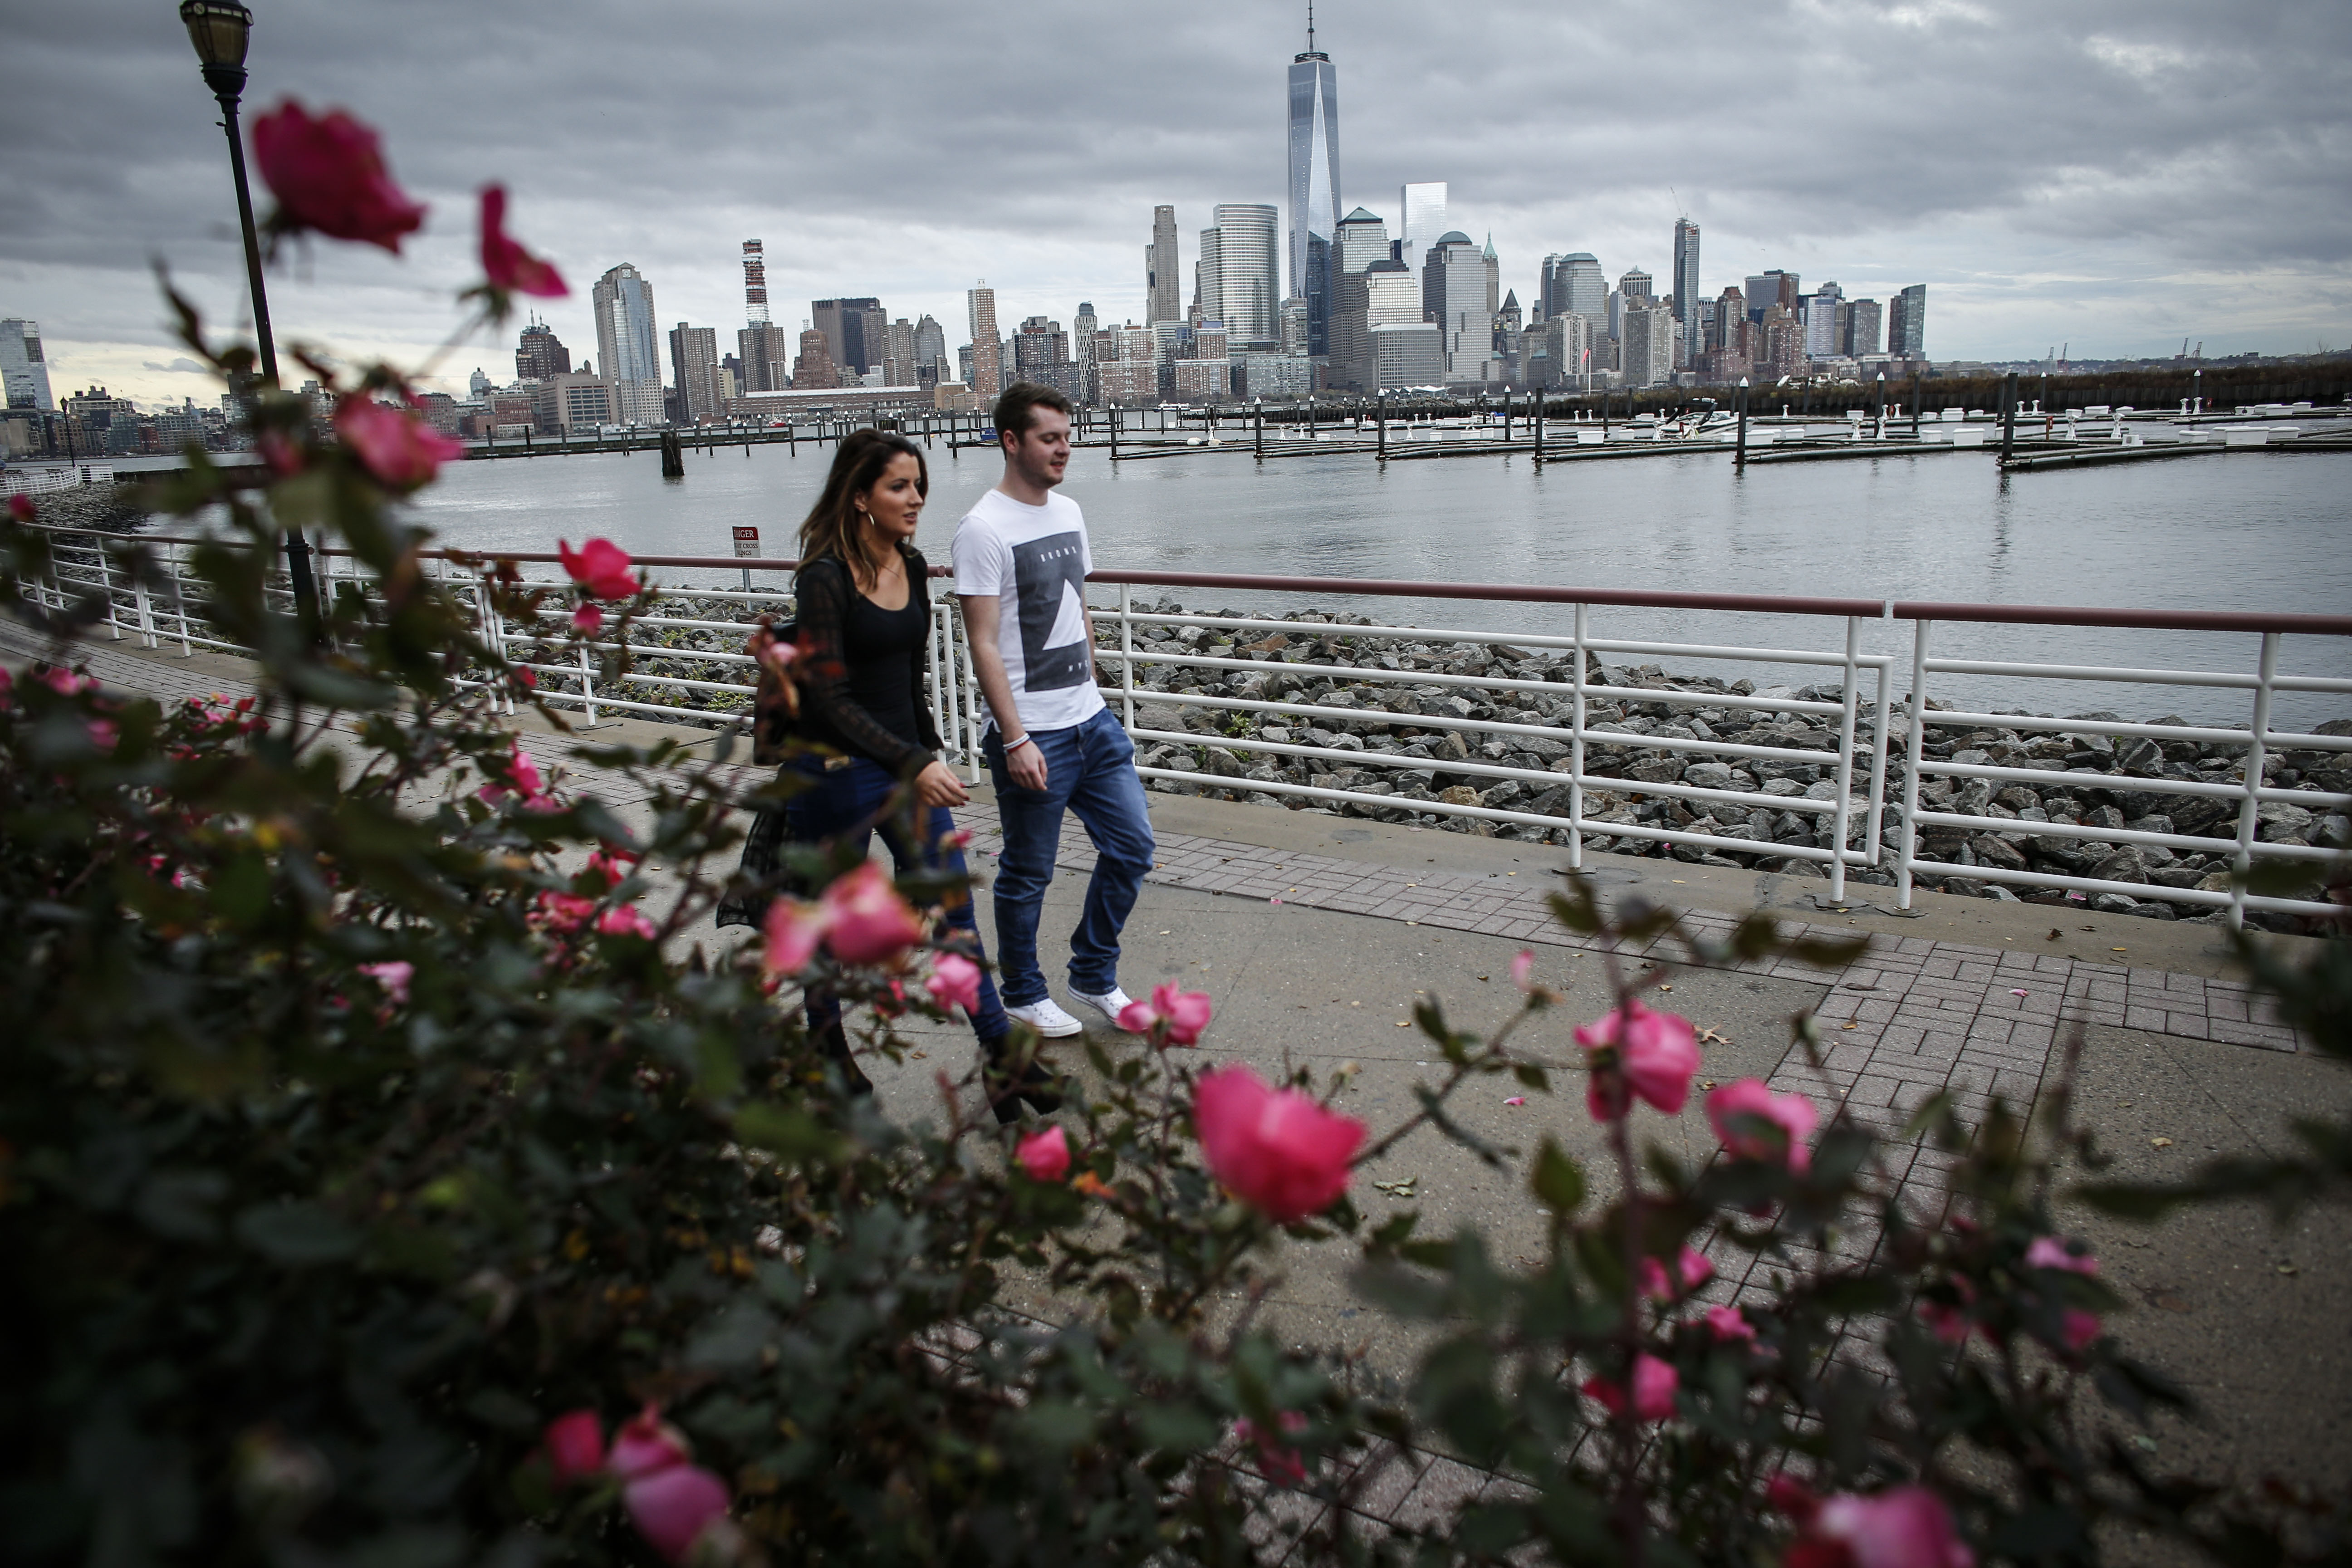 NEWPORT, NJ - DECEMBER 24: A couple walks by the Hudson River shore on December 24, 2015 in Newport, New Jersey. New York and New Jersey have seen highs in the upper 50s this week, with temperatures expected to reach the low 70s on Christmas Eve. (Photo by Kena Betancur/Getty Images)